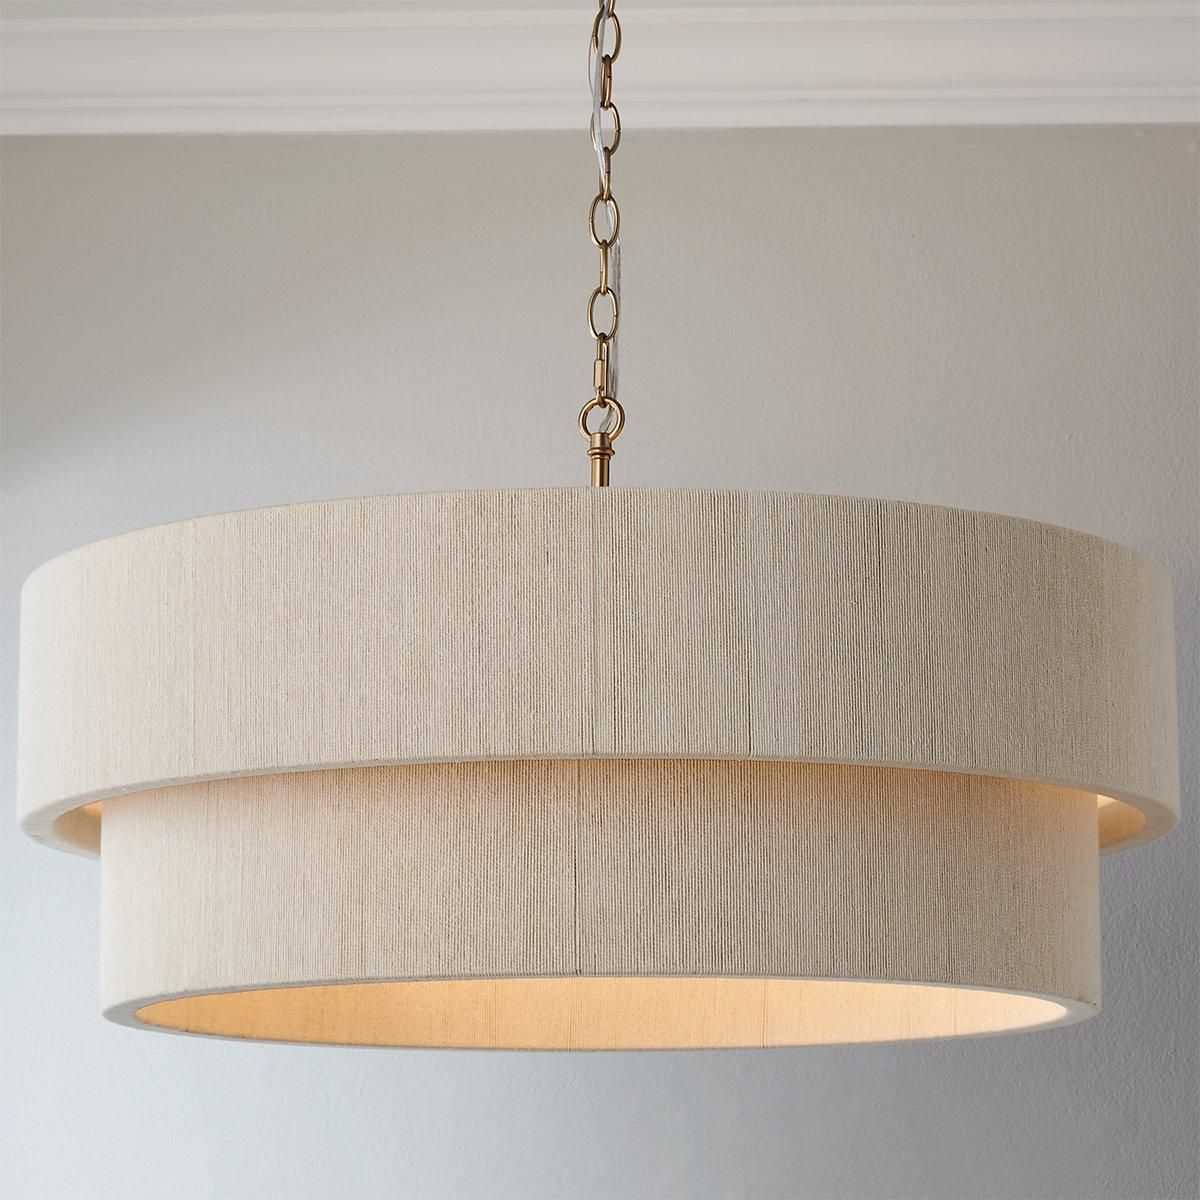 Kalini Double Drum Chandelier | Shades of Light